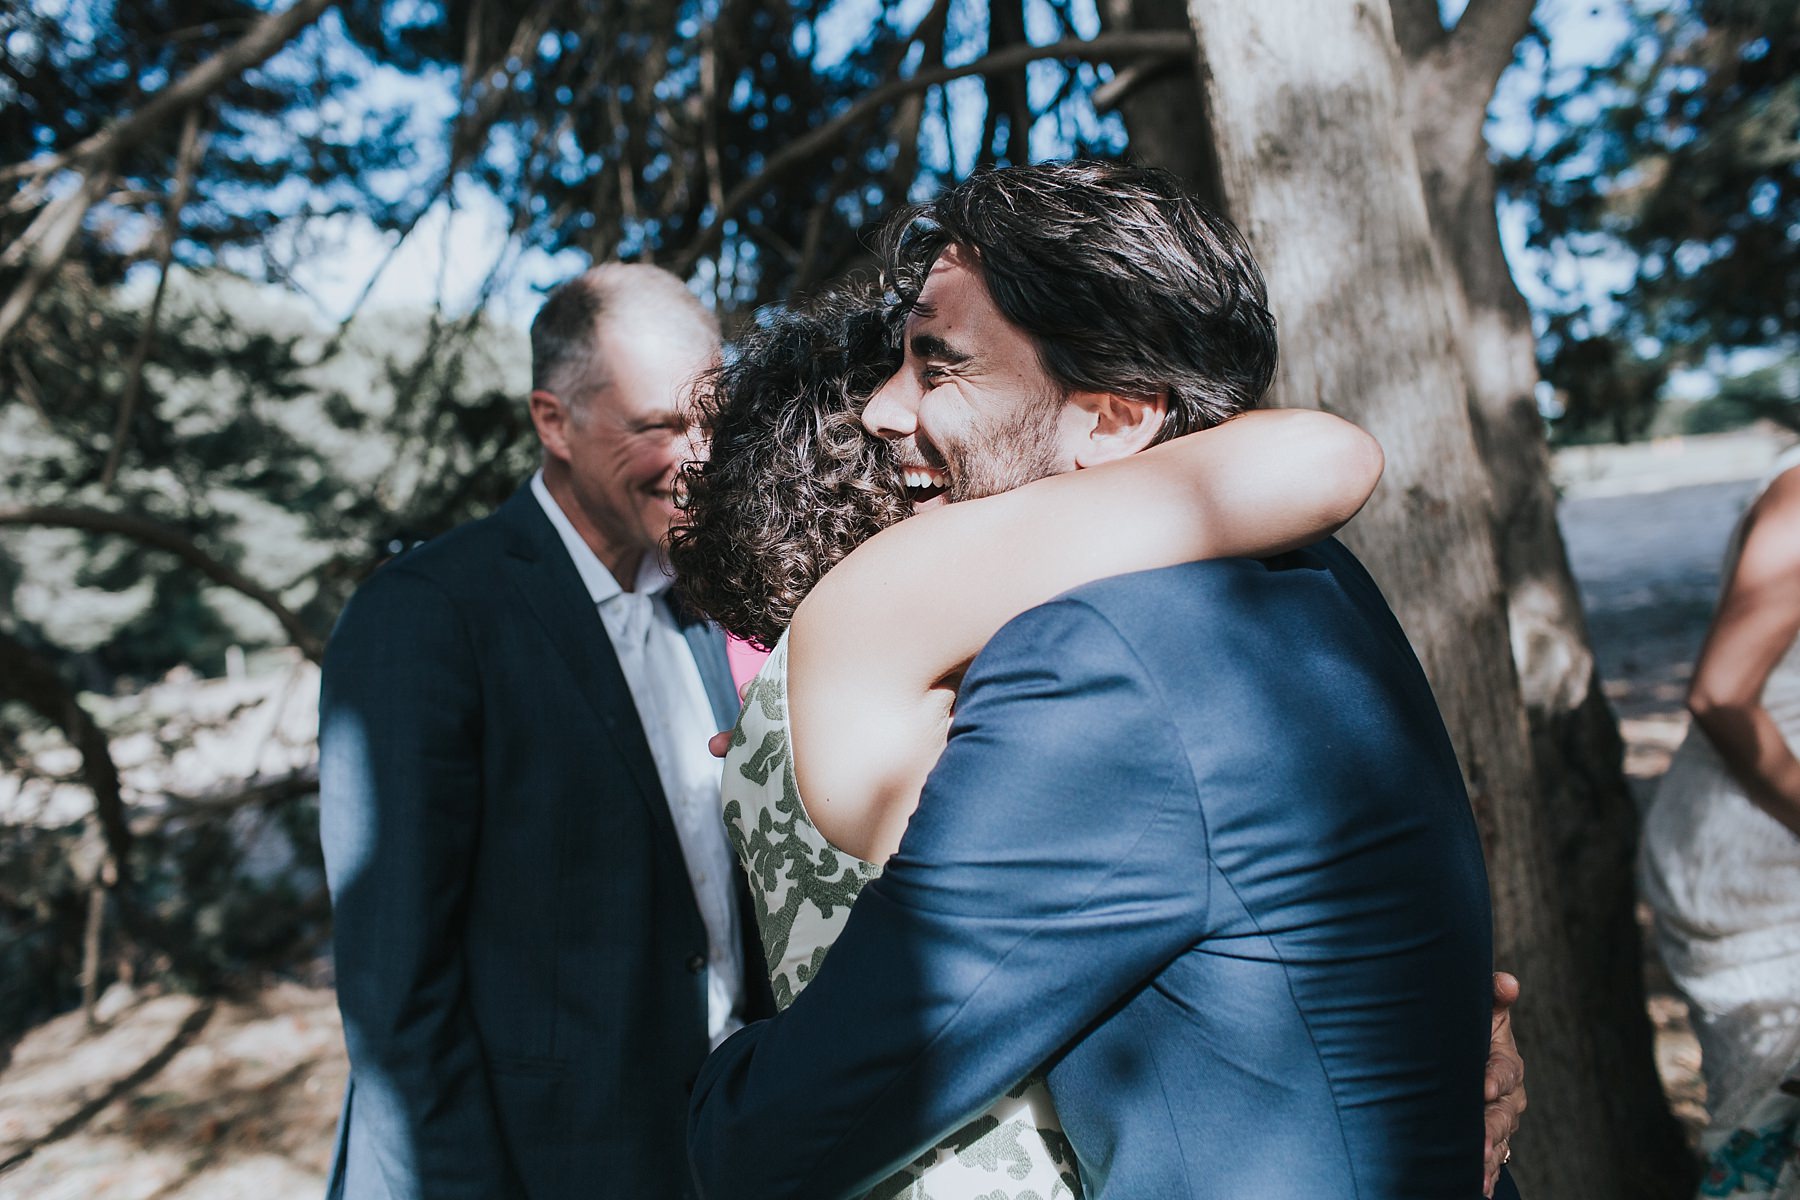 excited hugs and tears at wedding ceremony